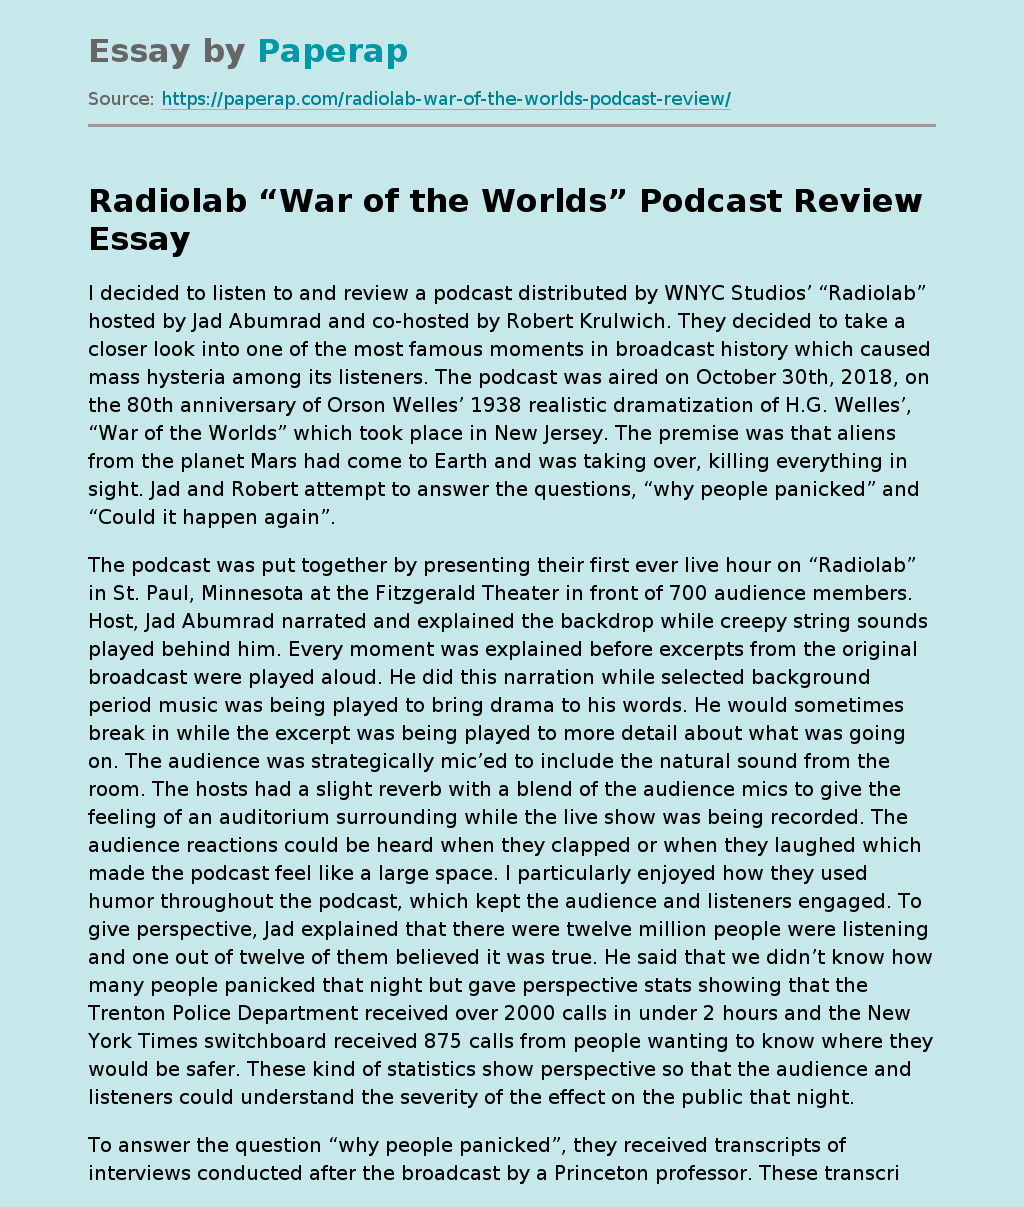 Radiolab “War of the Worlds” Podcast Review